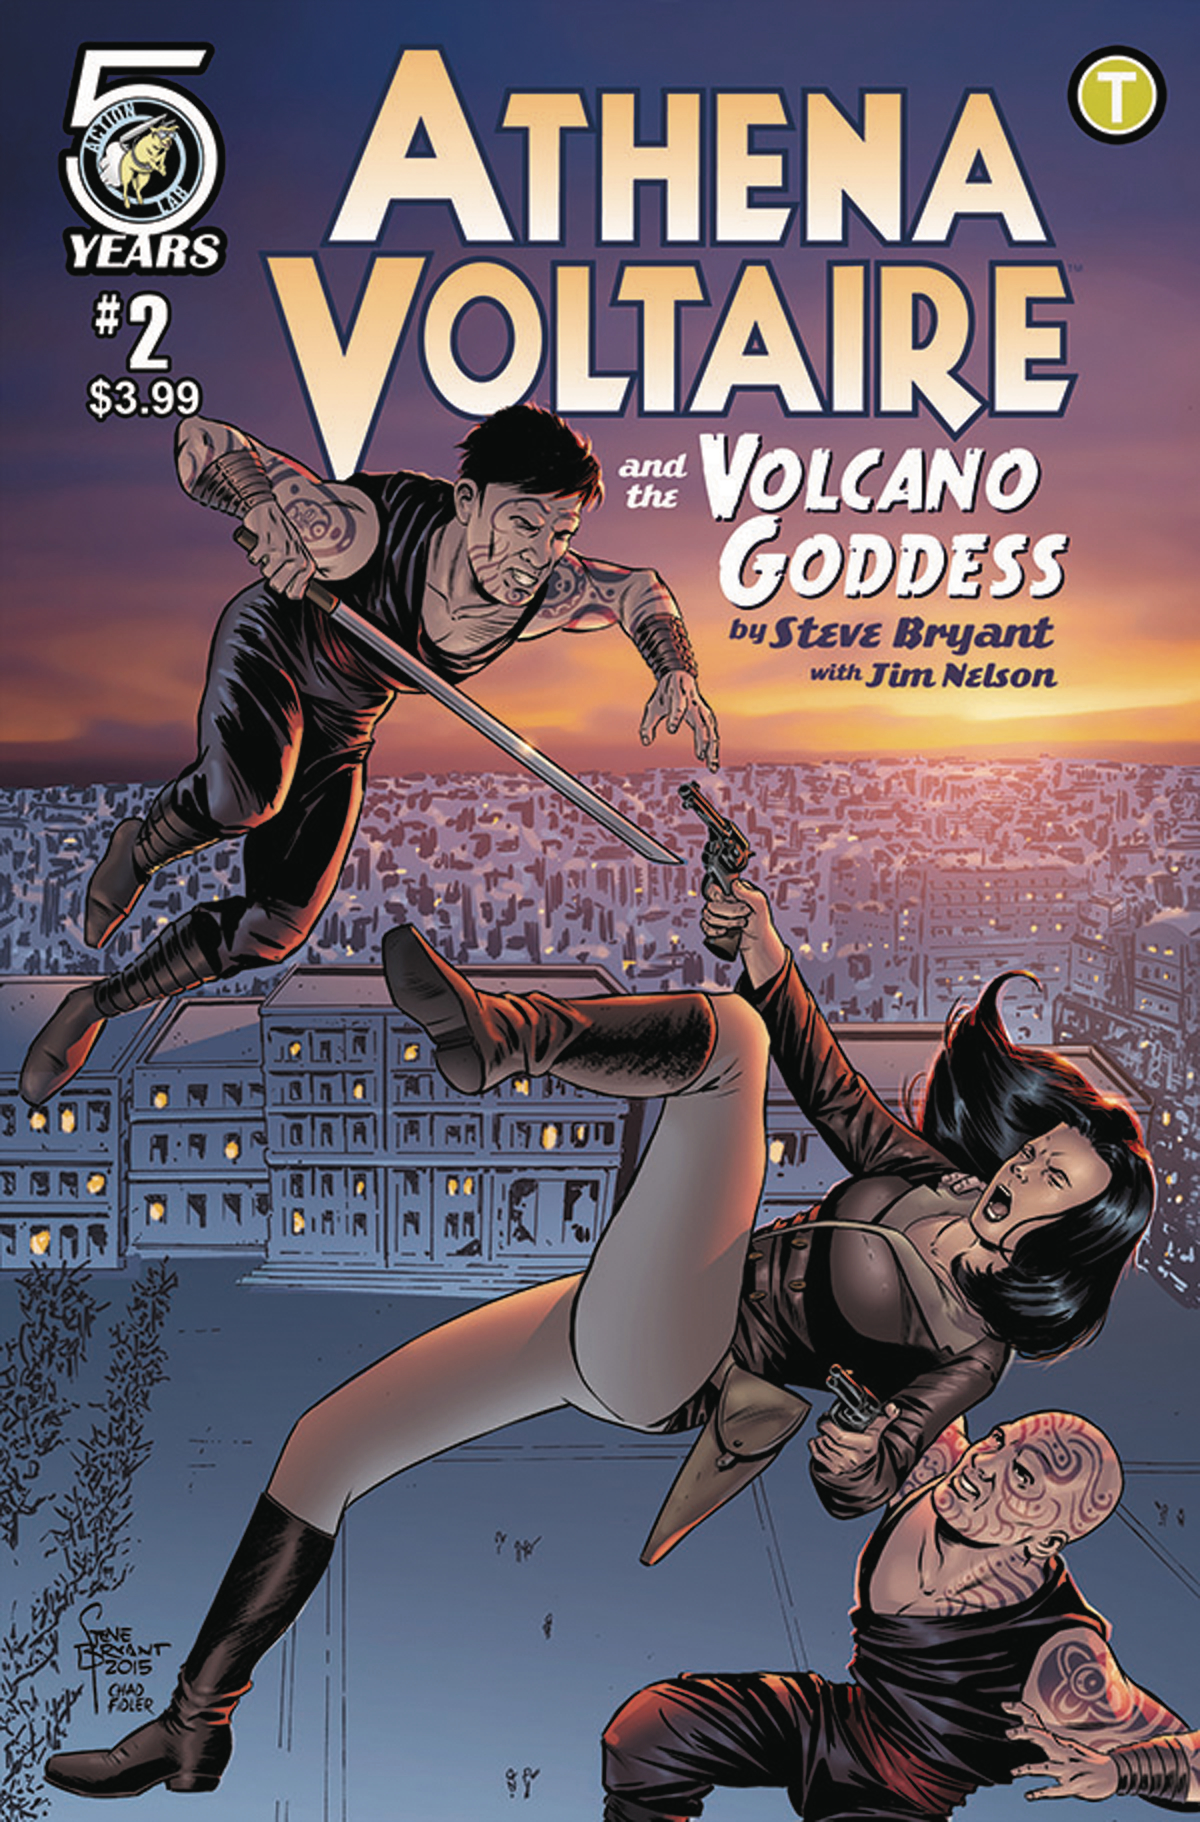 ATHENA VOLTAIRE AND THE VOLCANO GODDESS #2 CVR A BRYANT